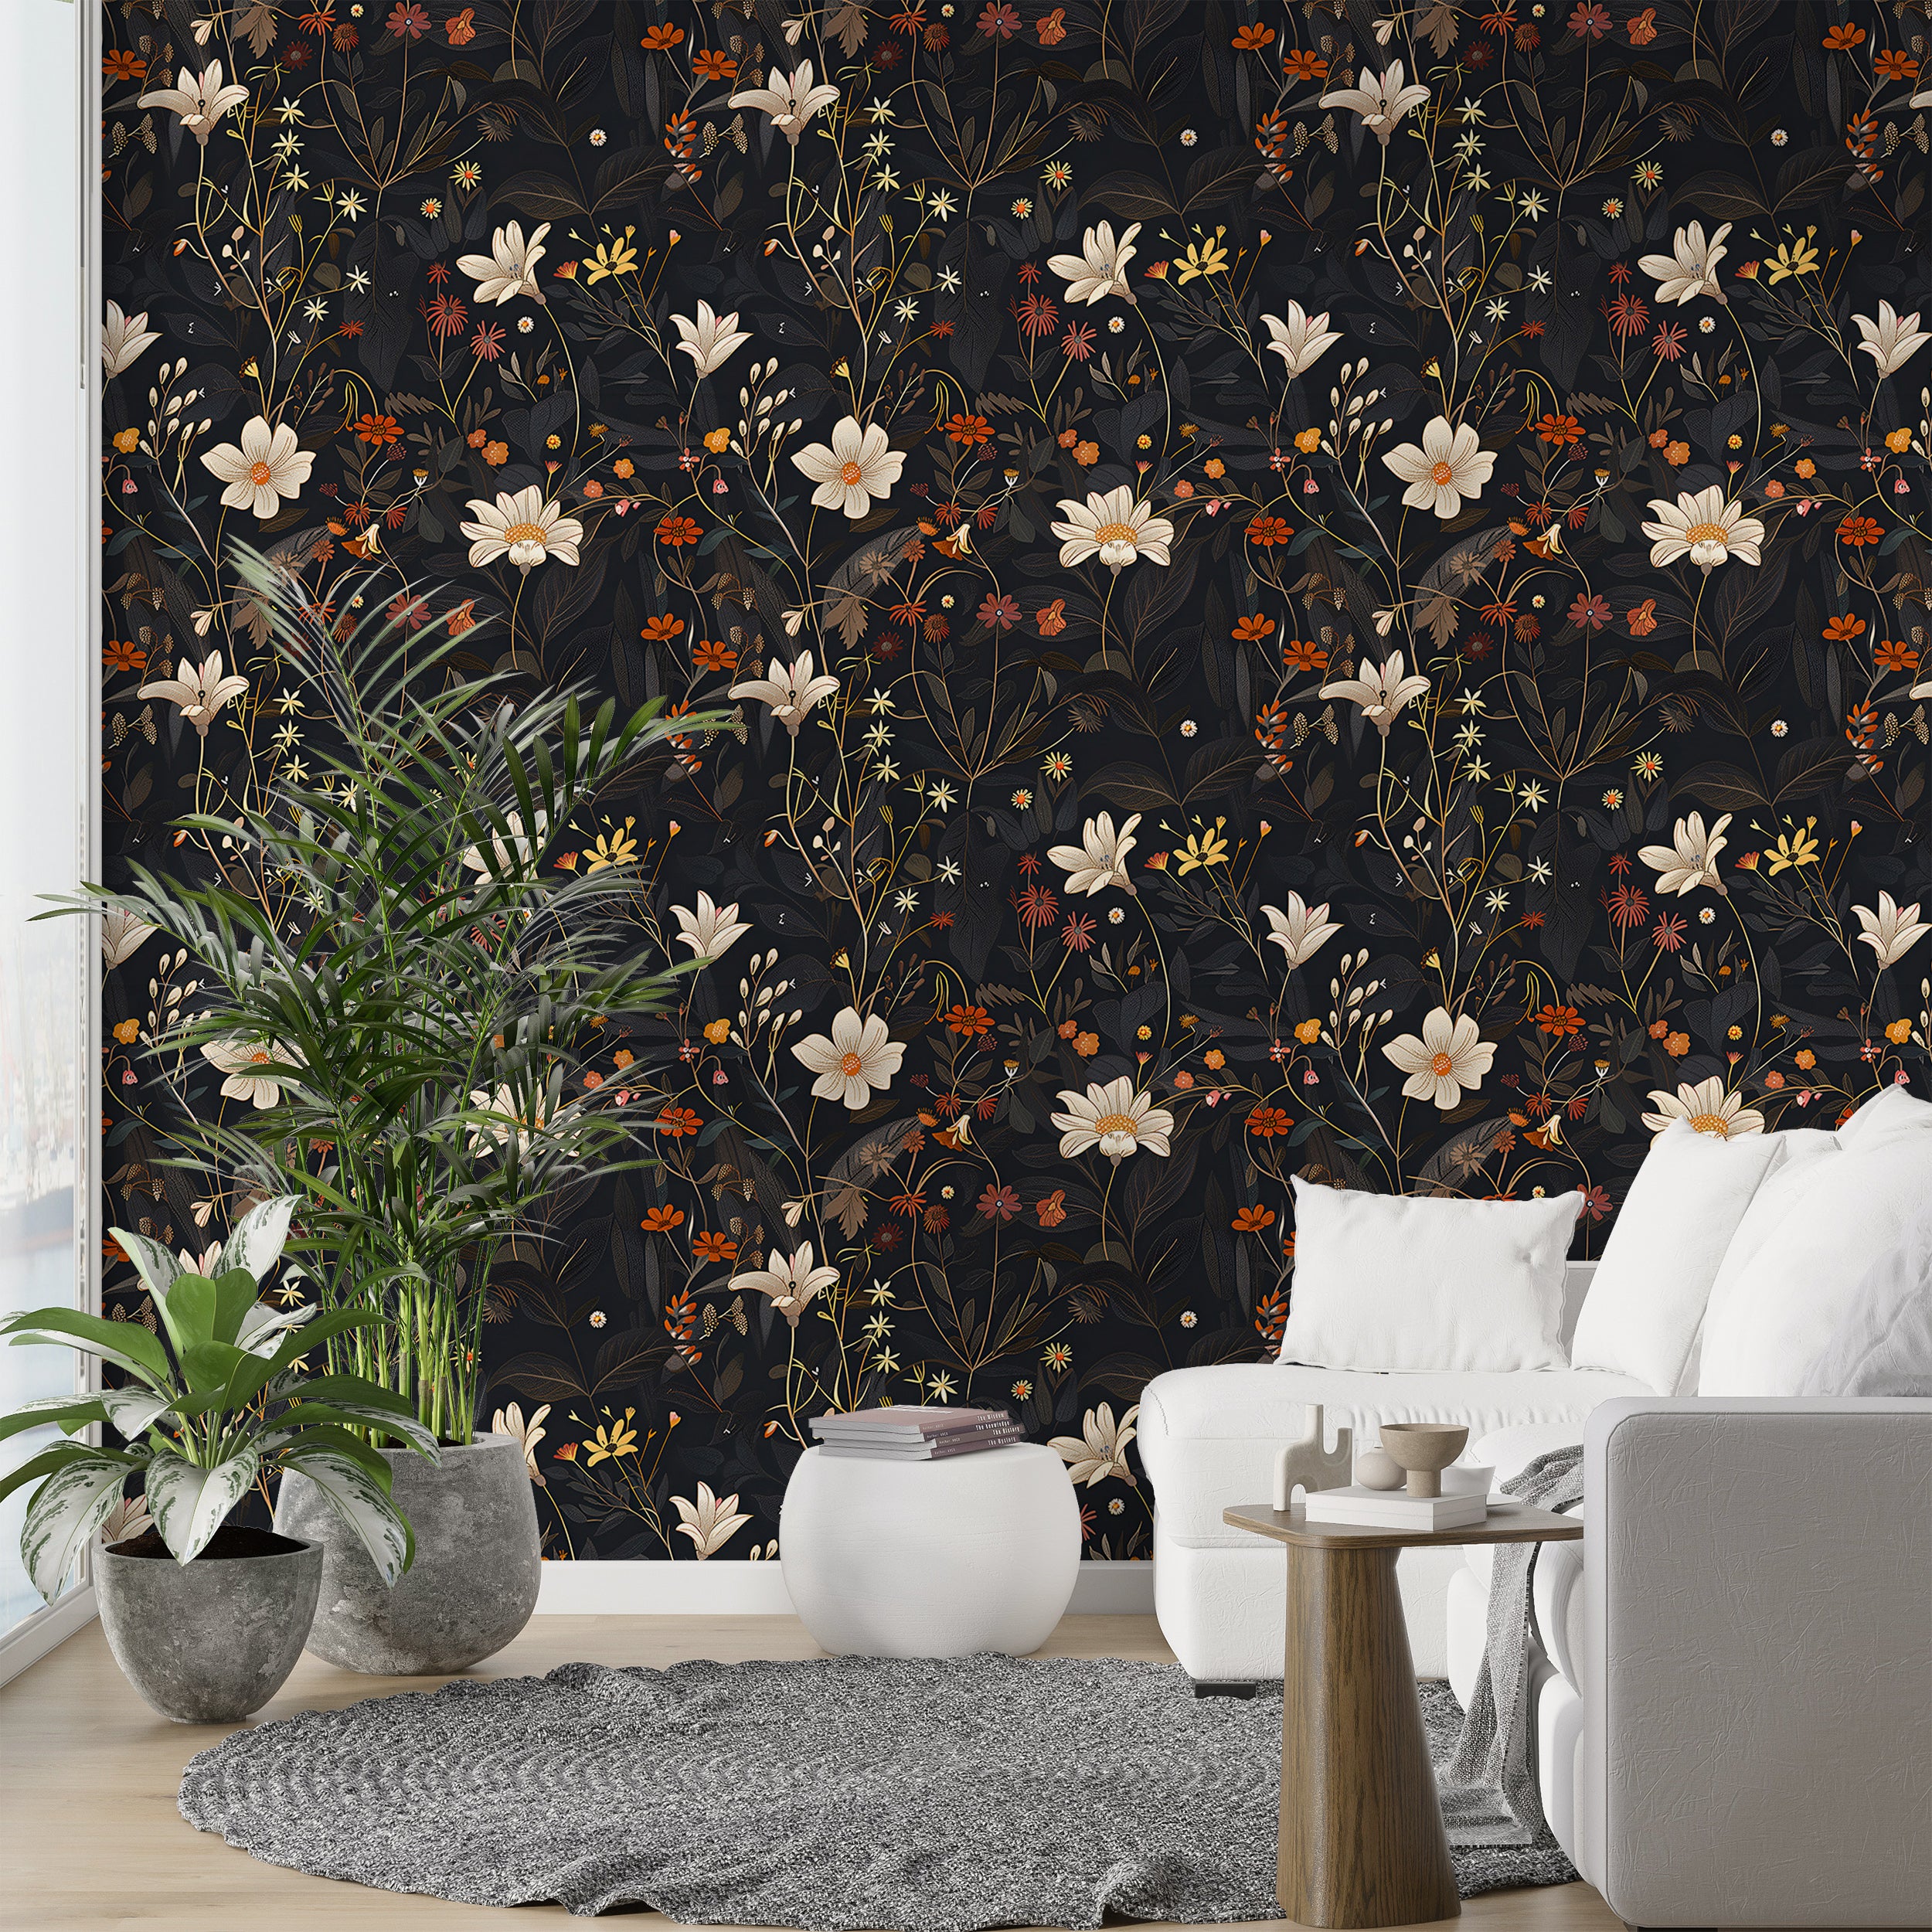 Wild Flowers Dark Wallpaper, Meadow Flower Peel and Stick Wall Decal, Black and Red Botanical Wallpaper, Dark Field Floral Decor